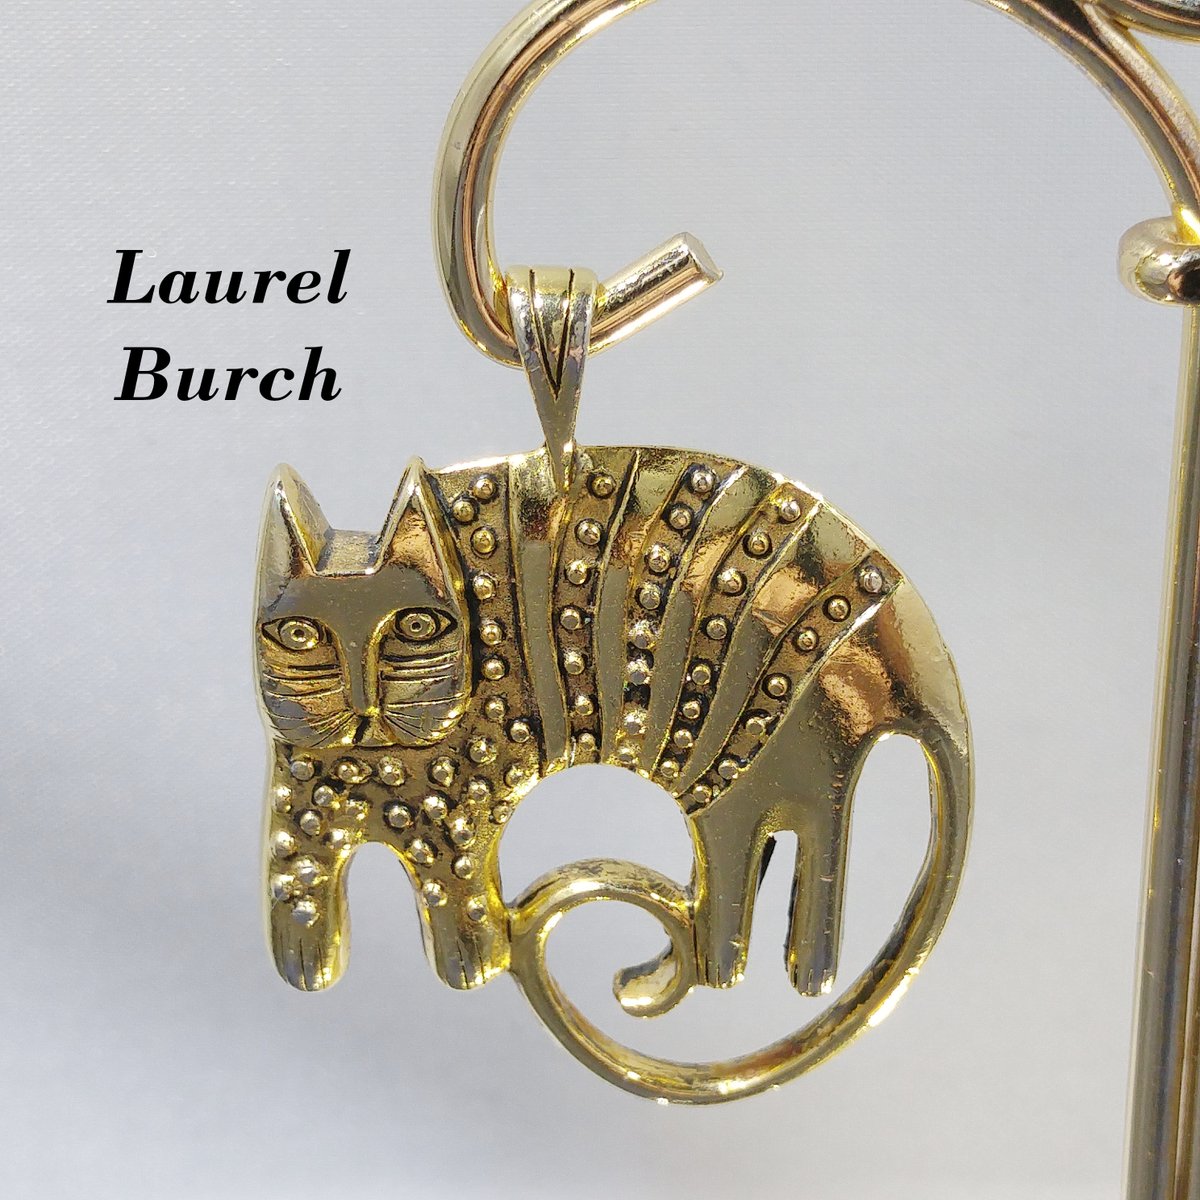 #etsy shop: Laurel Burch Cat Puffy Pendant, Double Sided, 1980s Vintage Jewelry etsy.me/3wSPDTS #gold #animal #animals #black #women #bohohippie #laurelburch #vintagependant #vintagejewelry